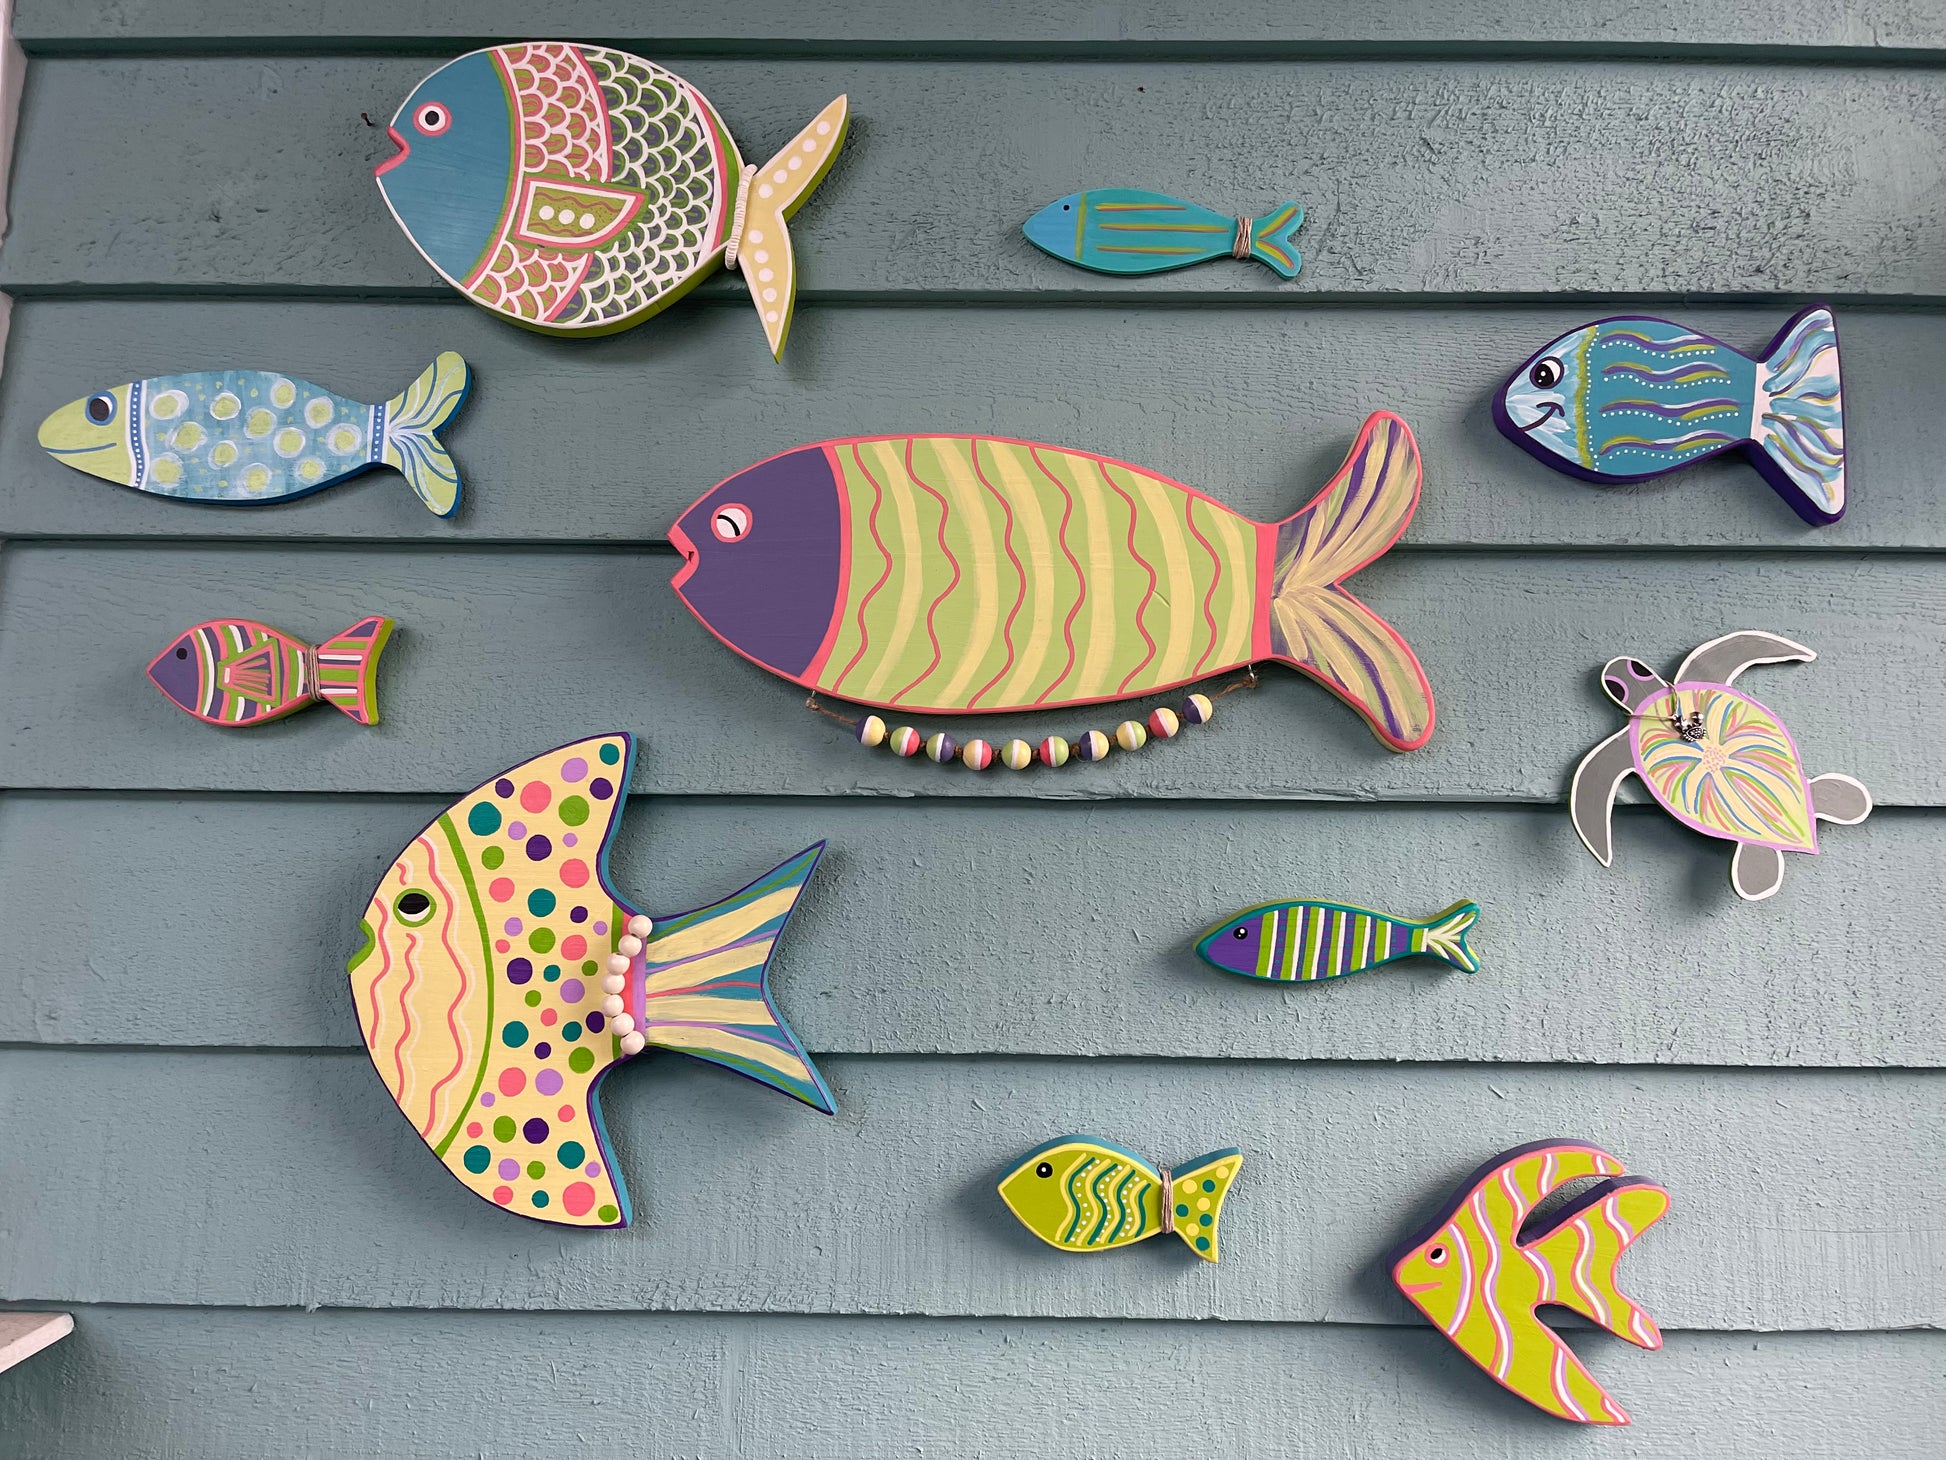 These are fish that were custom painted to match a home redesign; they were placed in a stairwell so it looks like you are walking under water. Cool!